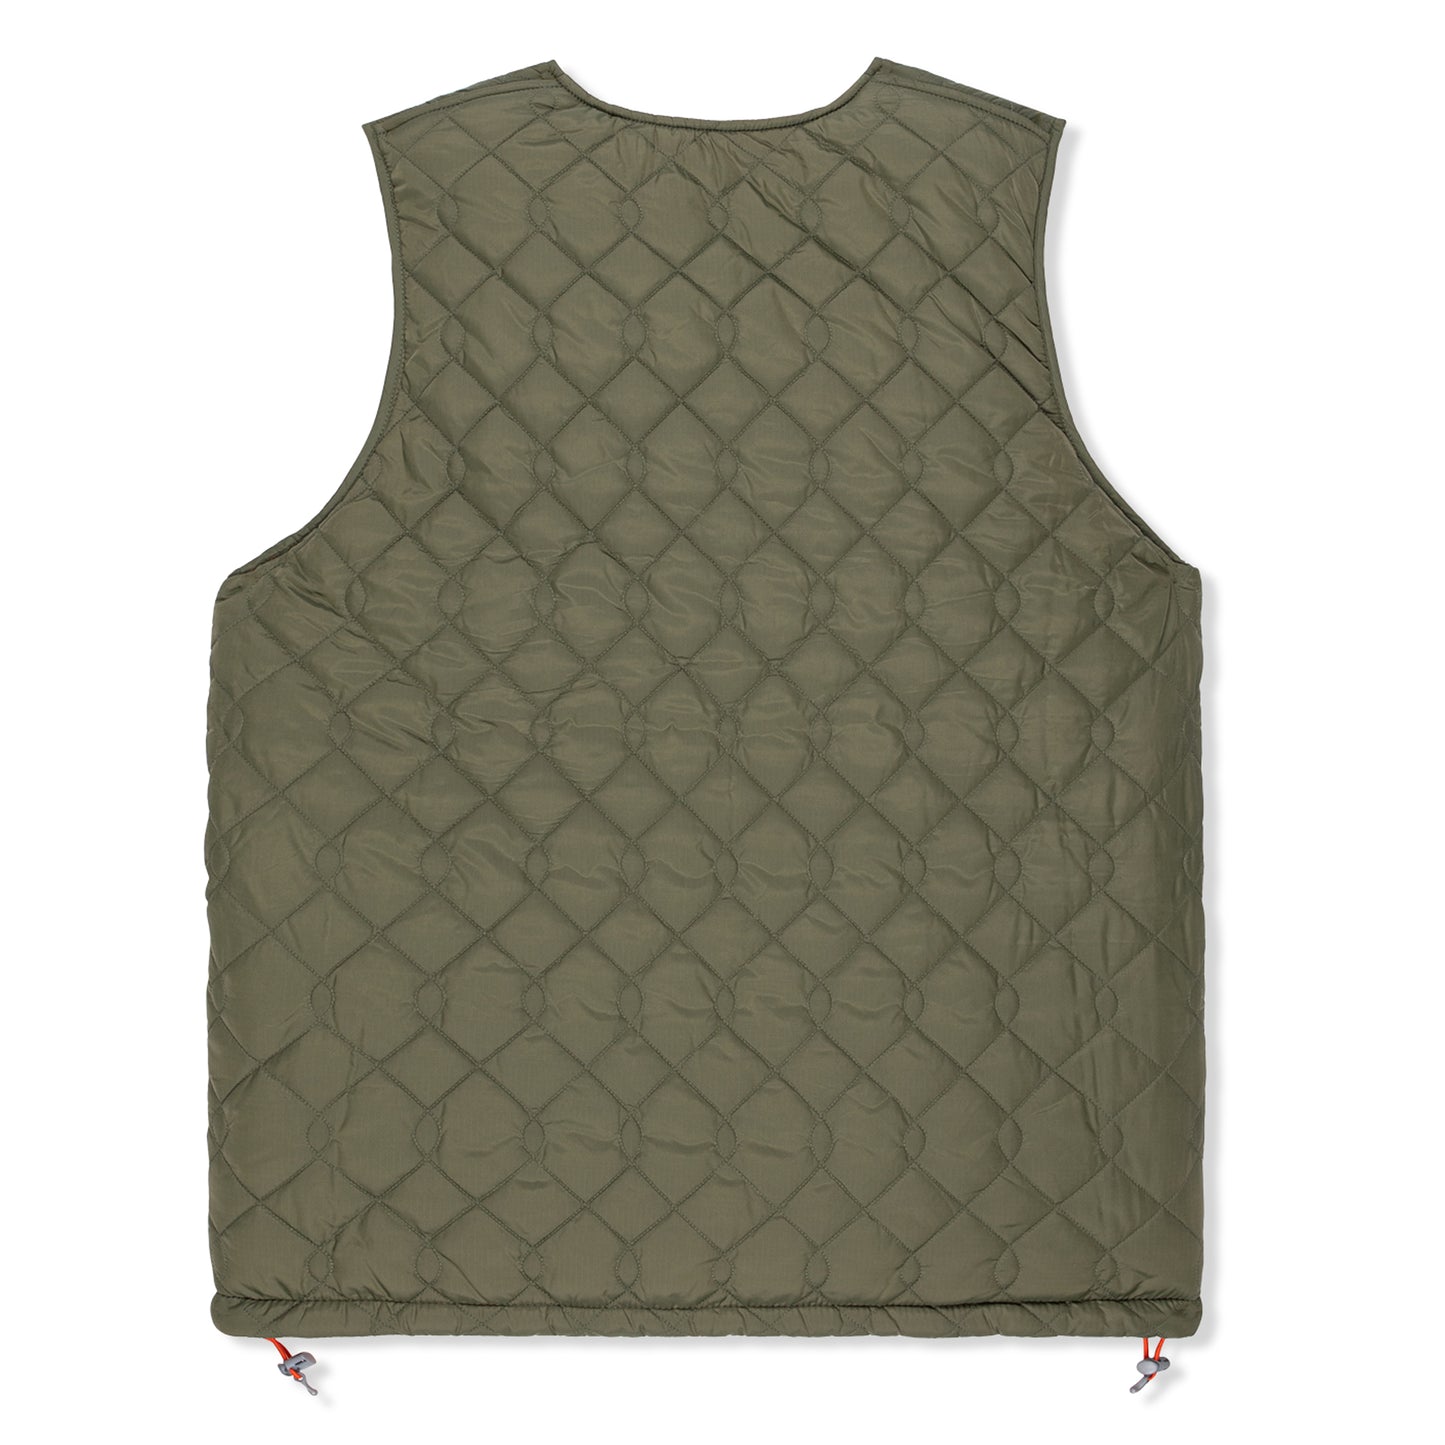 Butter Goods Chainlink Reversible Puffer Vest (Army / Orange)